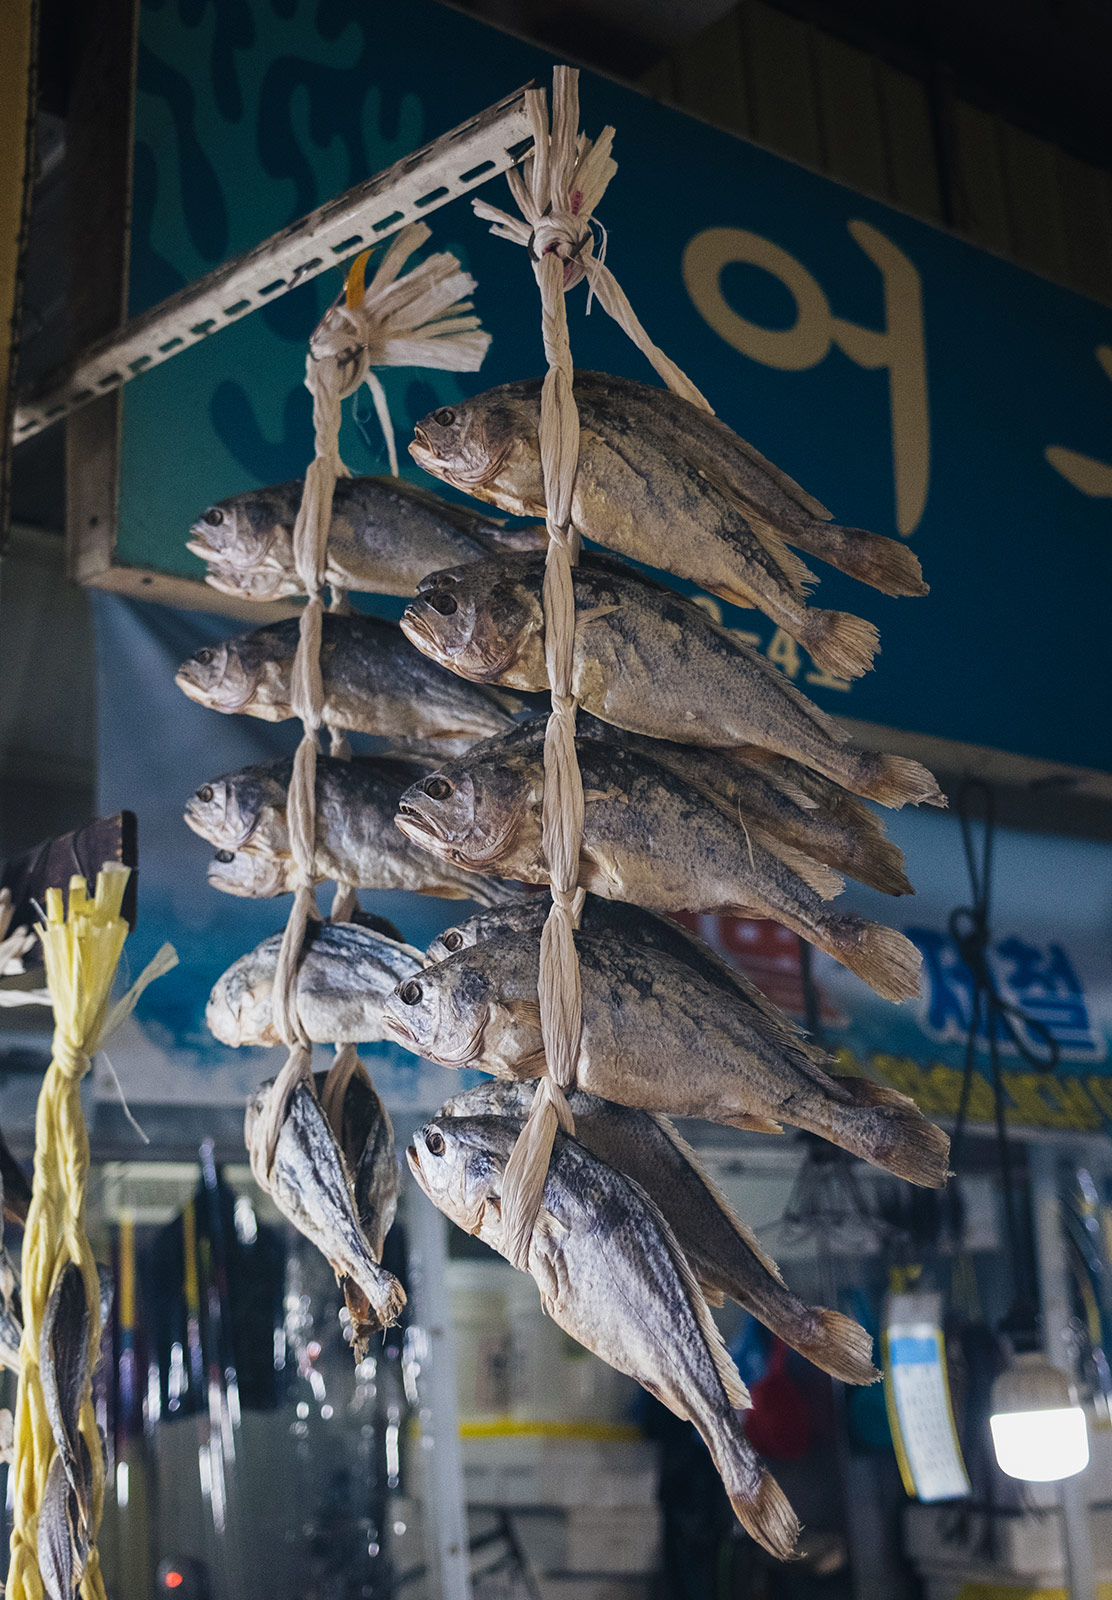 Hanging fish tied together